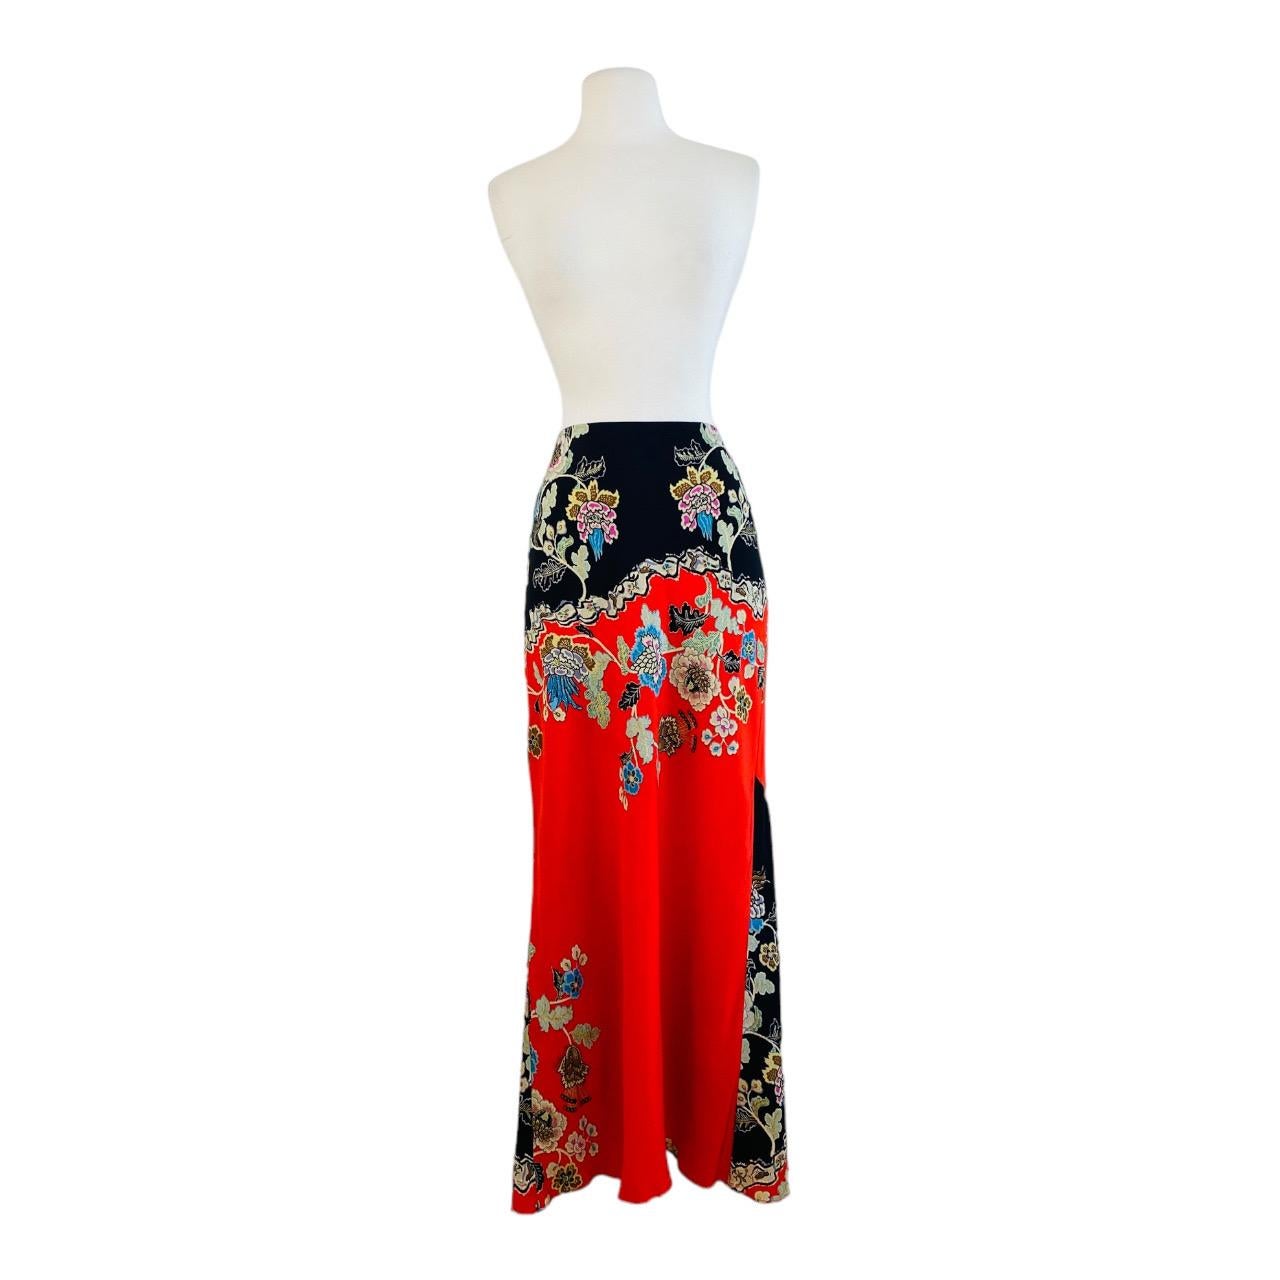 Incredible S/S 2003 Roberto Cavalli Skirt (shown pinned)
Chinoiserie collection
Red + black silk fabric with oversized bold floral print with gold glitter painted style accents
Elastic waistband
Maxi length
Slightly flared hemline
Unlined

Marked L,